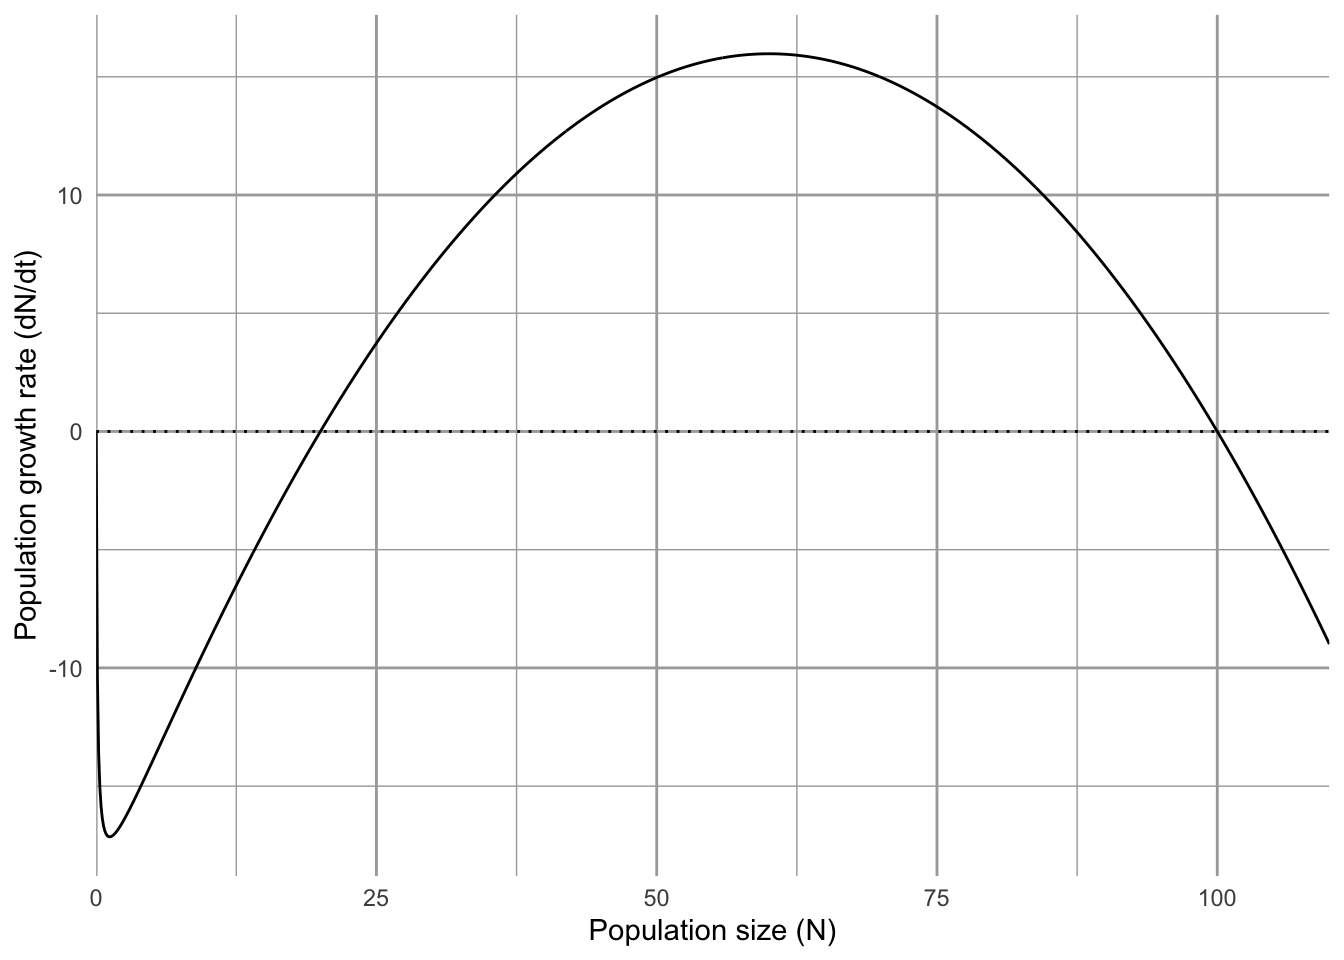 The Allee effect the a positive relation bewteen population growth rate and population size, often best envisioned as a negative consequence of small population size. Here, the threshold population size is 20, meaning that $dN/dt < 0$, when $N < 20$.